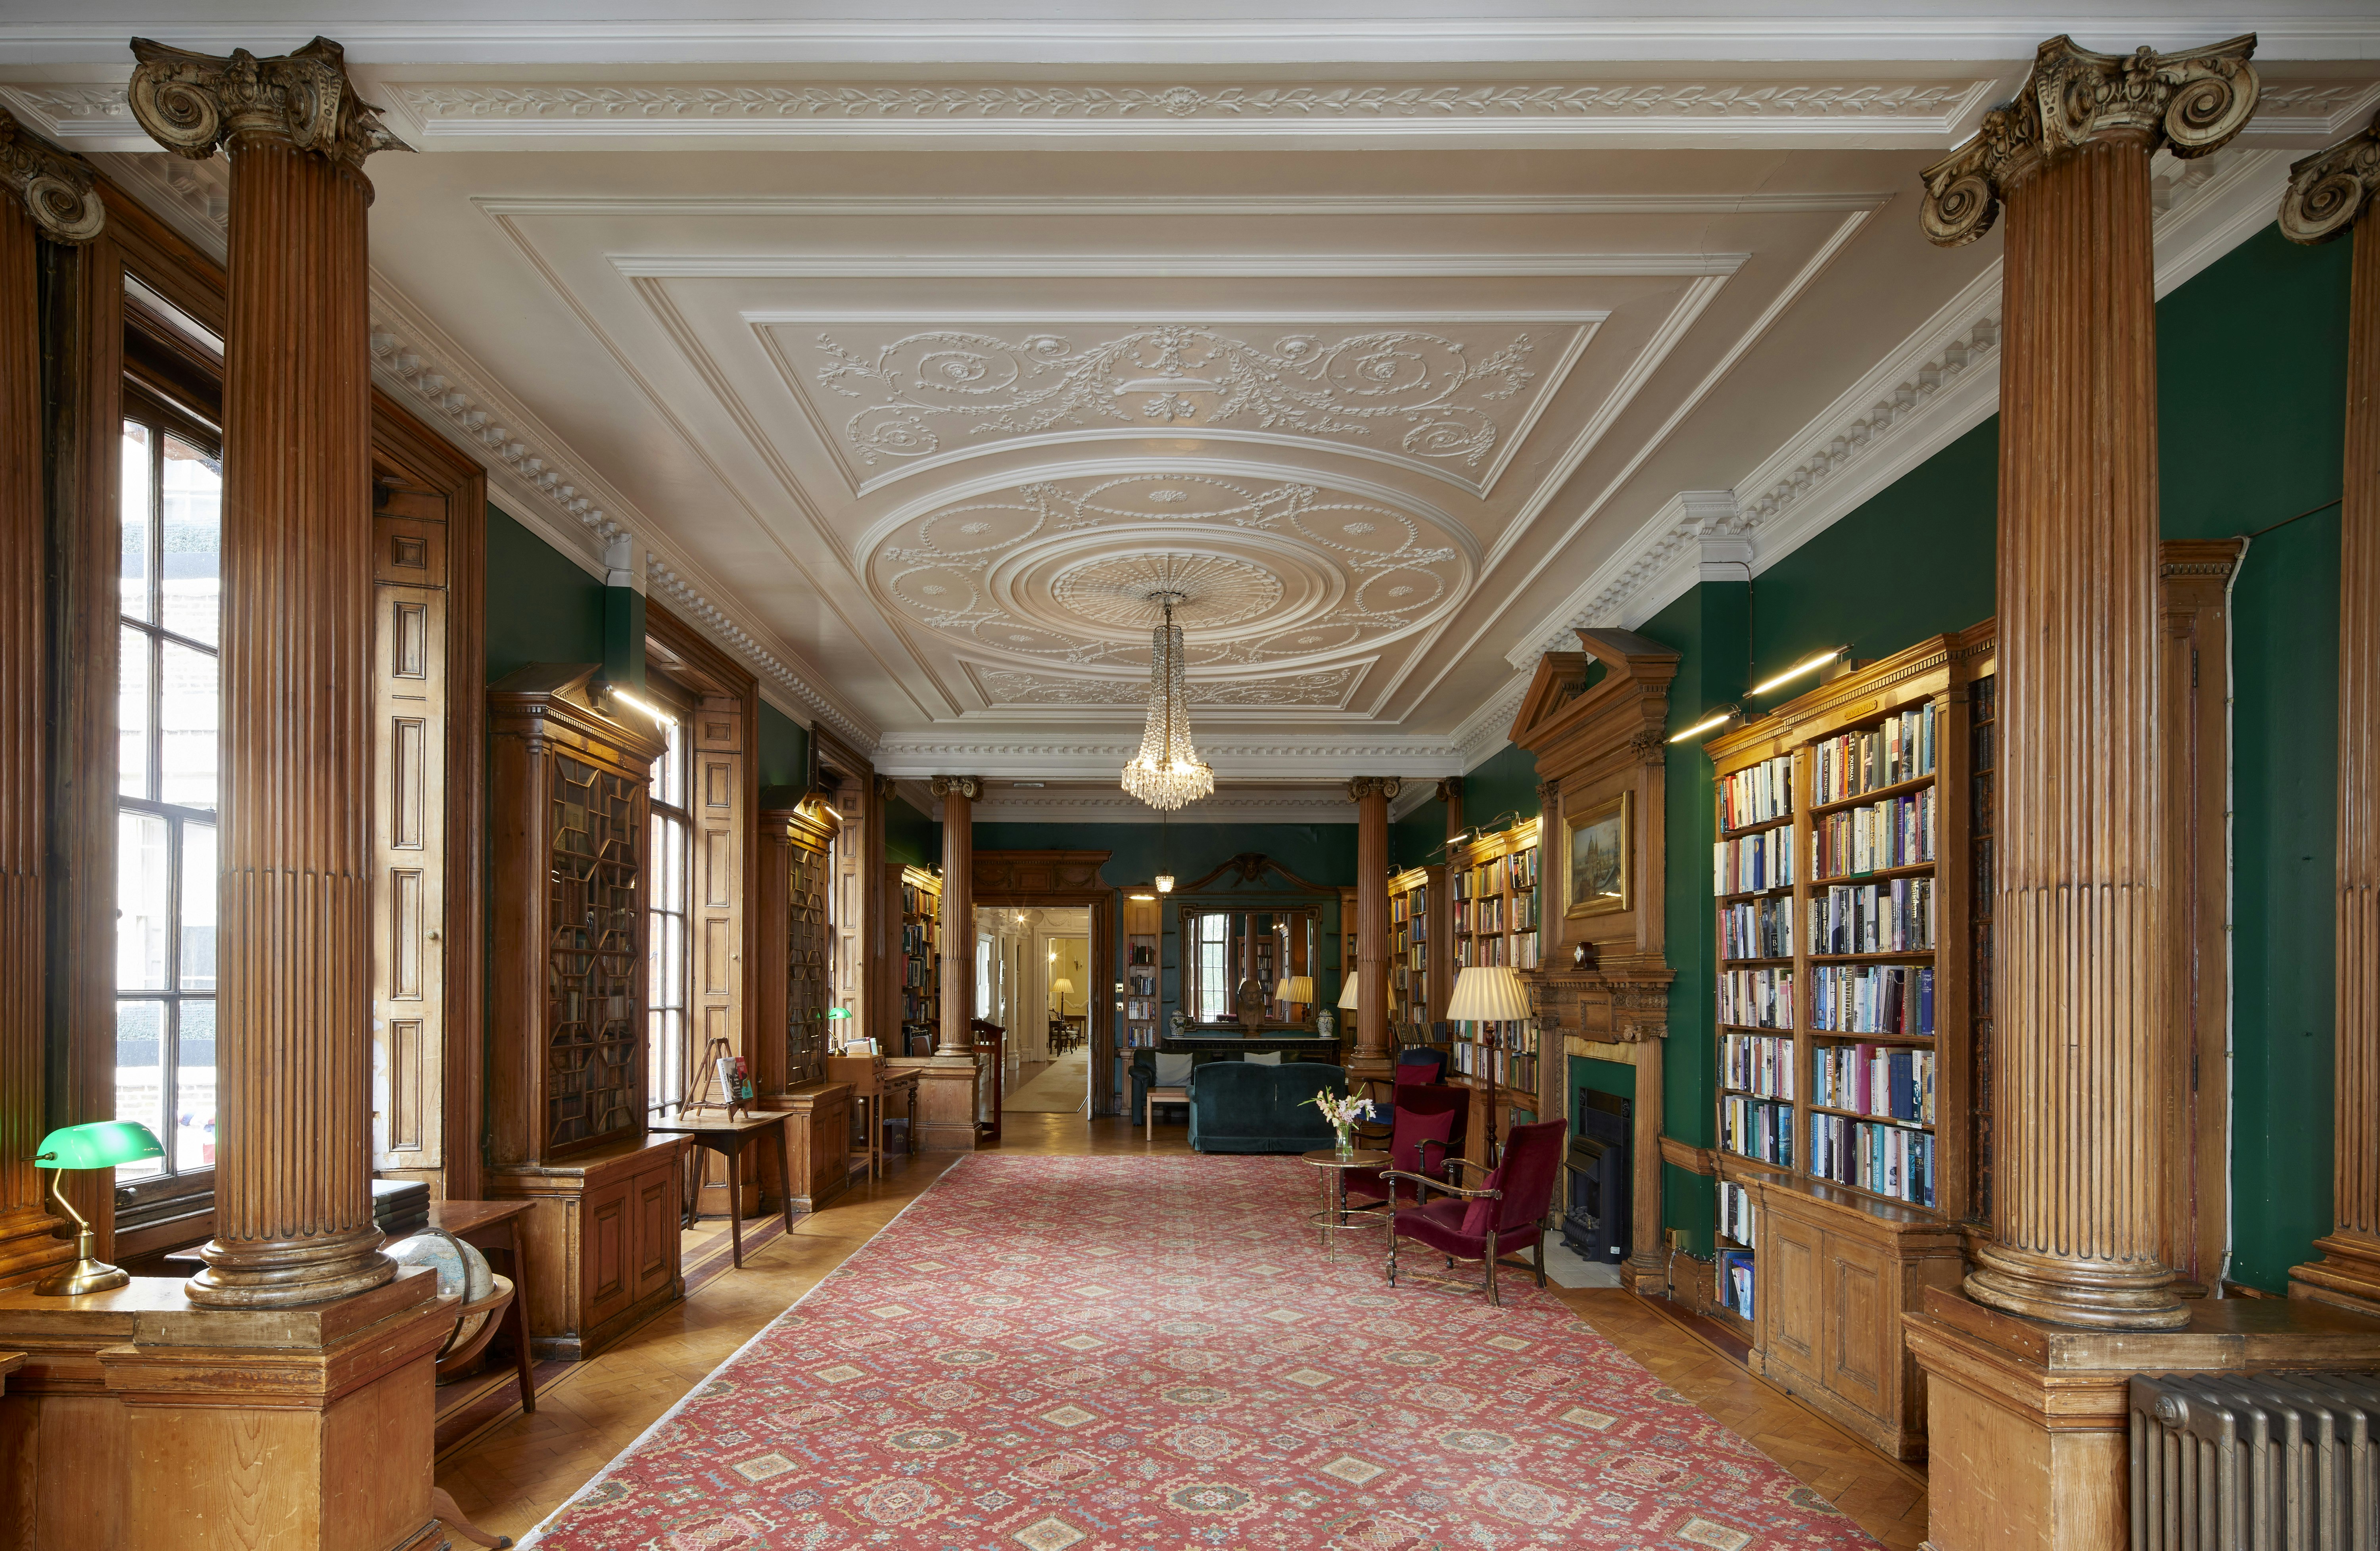 University Women's Club - The Library image 7